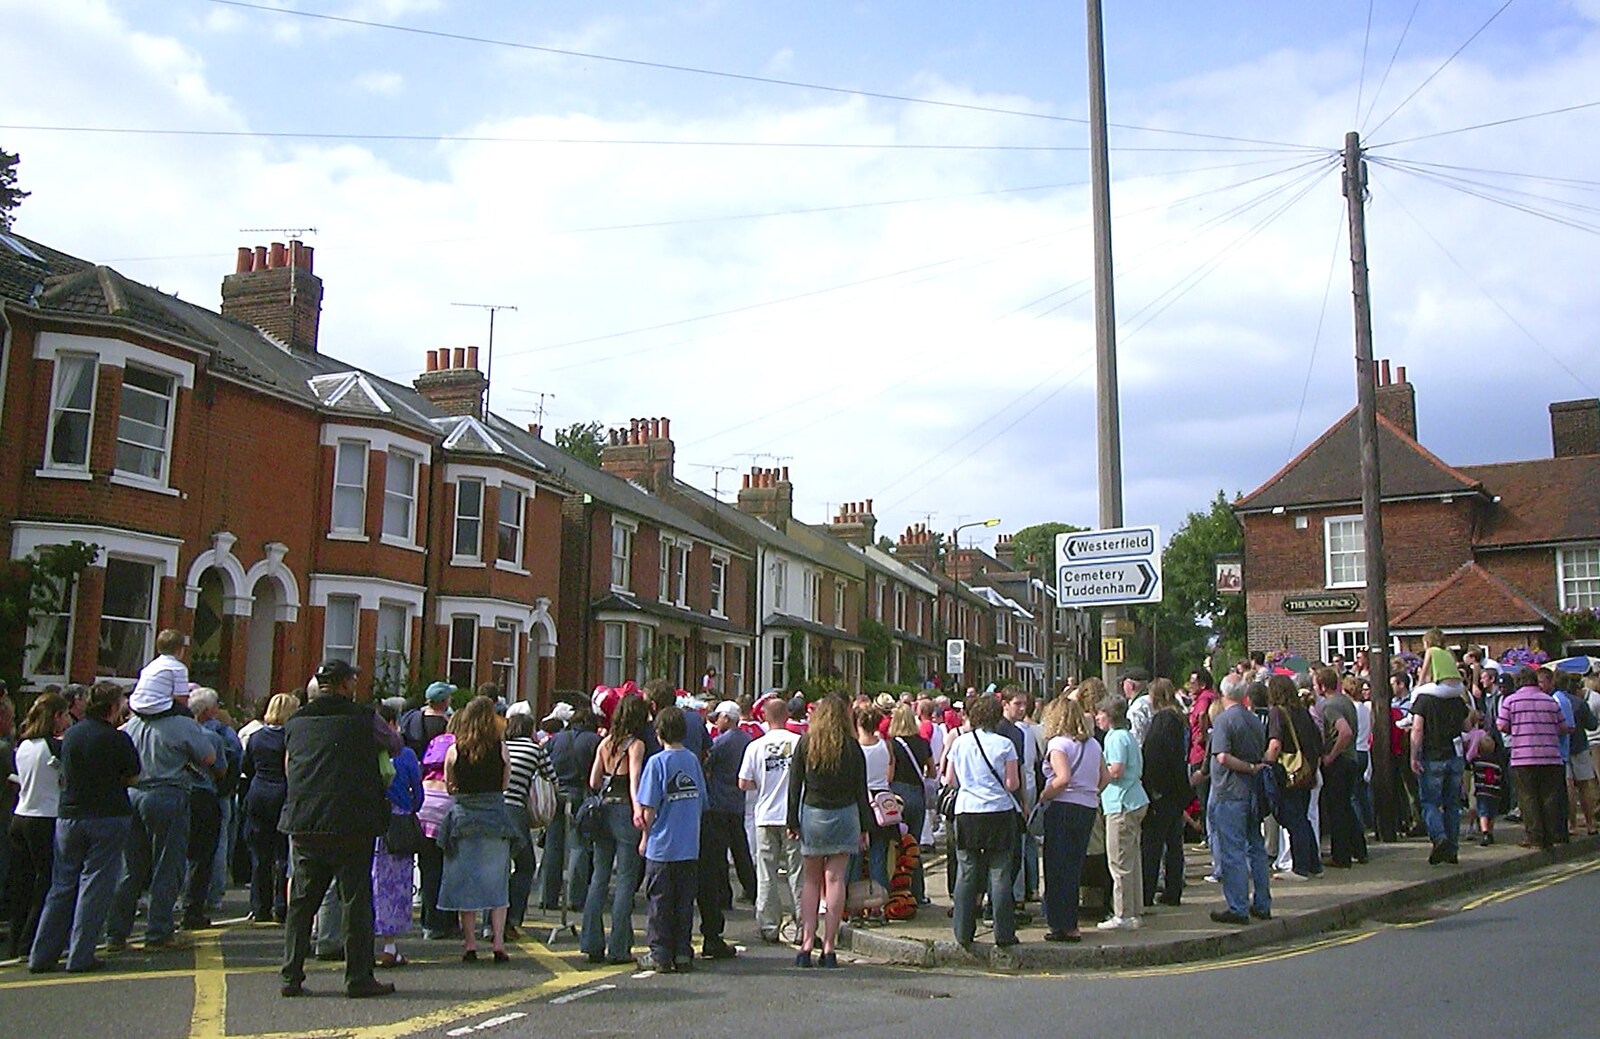 Ipswich Music Day and the BSCC in Cotton, Suffolk - 6th July 2003: More crowds on the street outside the Woolpack, on Westerfield Road